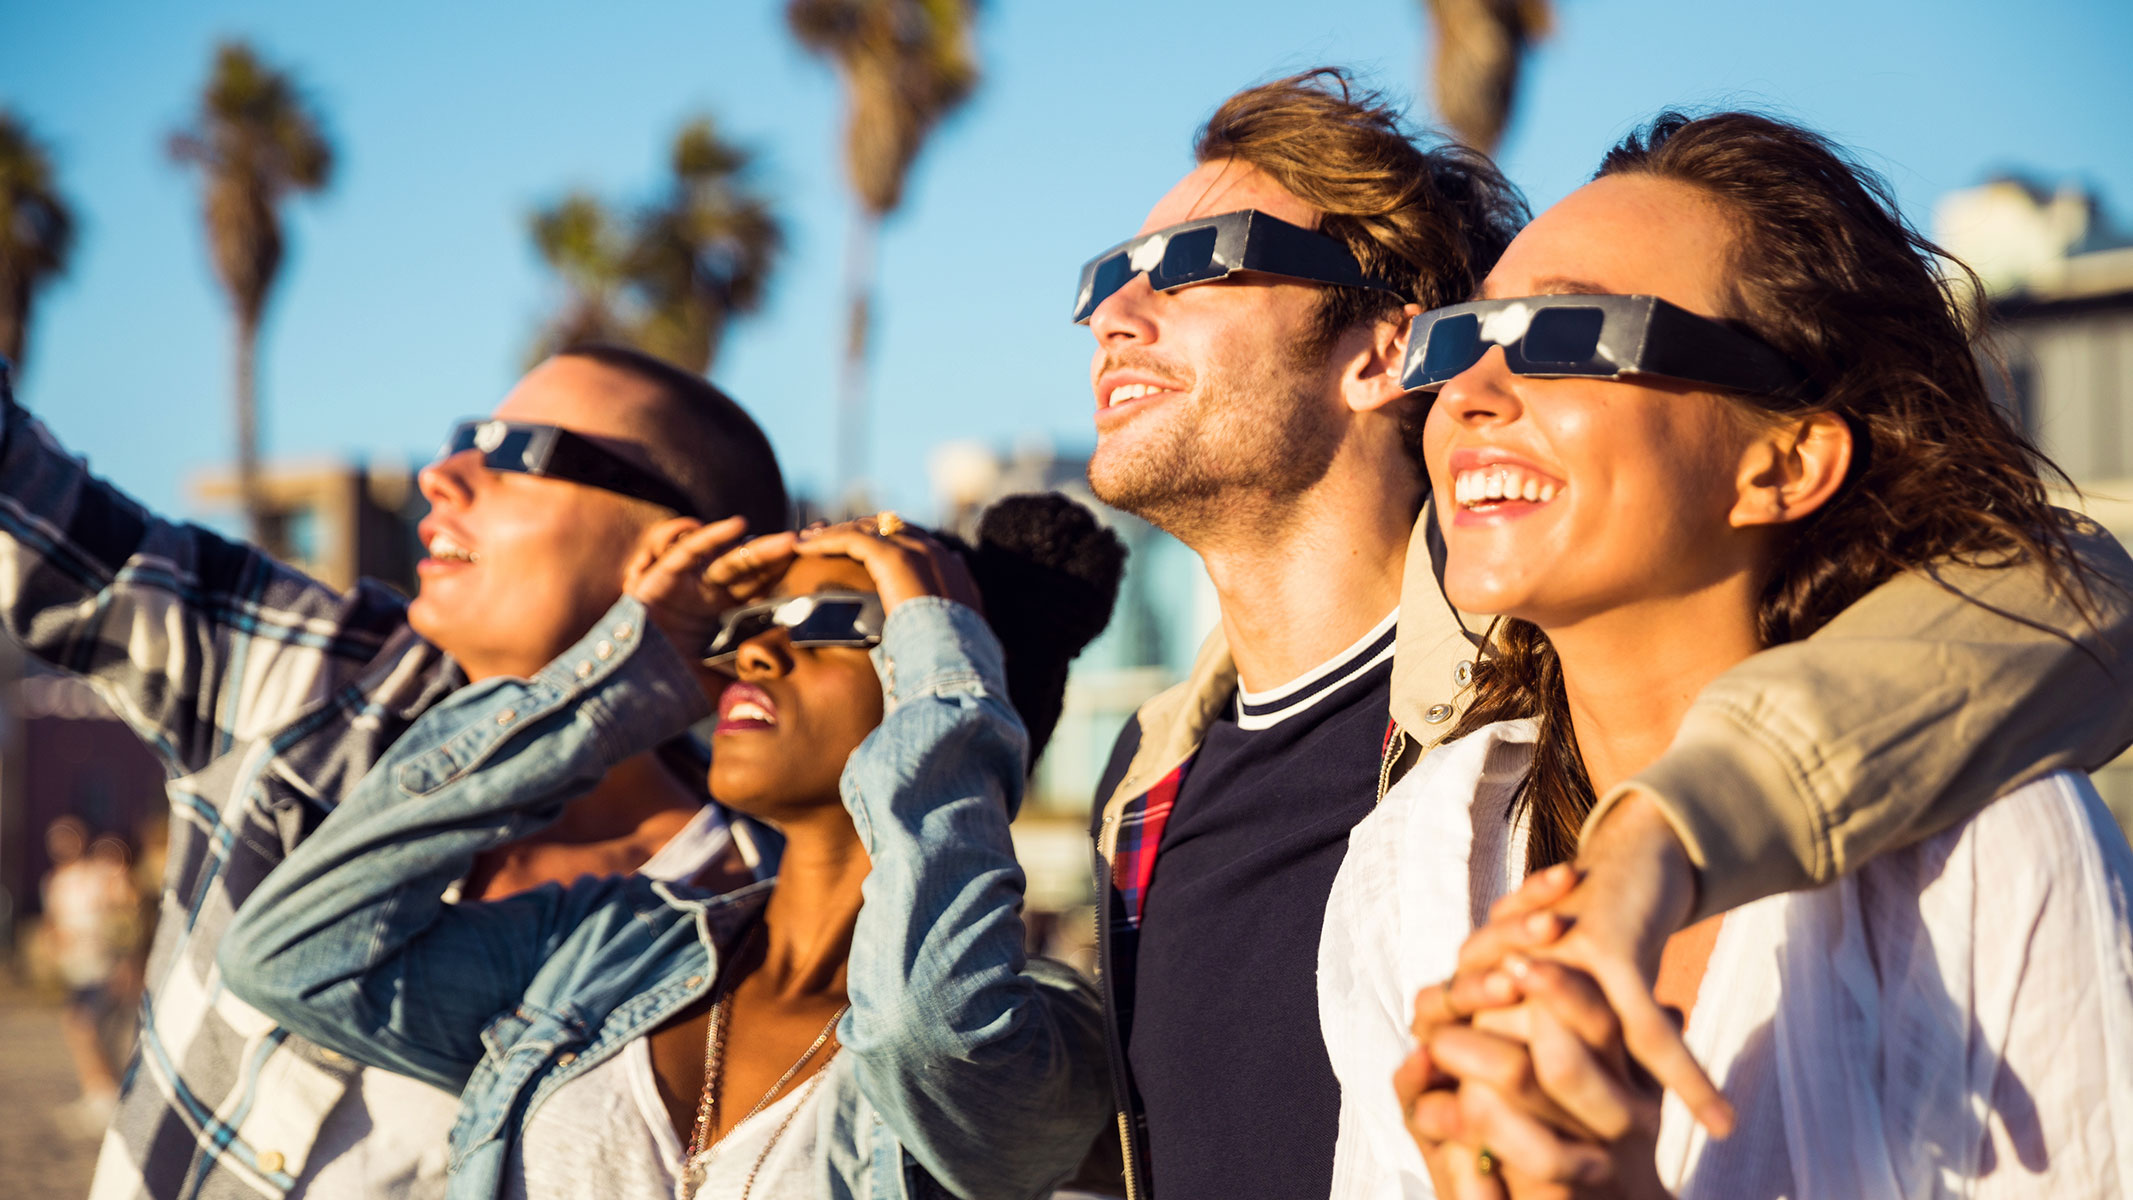 Solar Eclipse Glasses: Where to Buy the Best, High-Quality Eyewear | Space